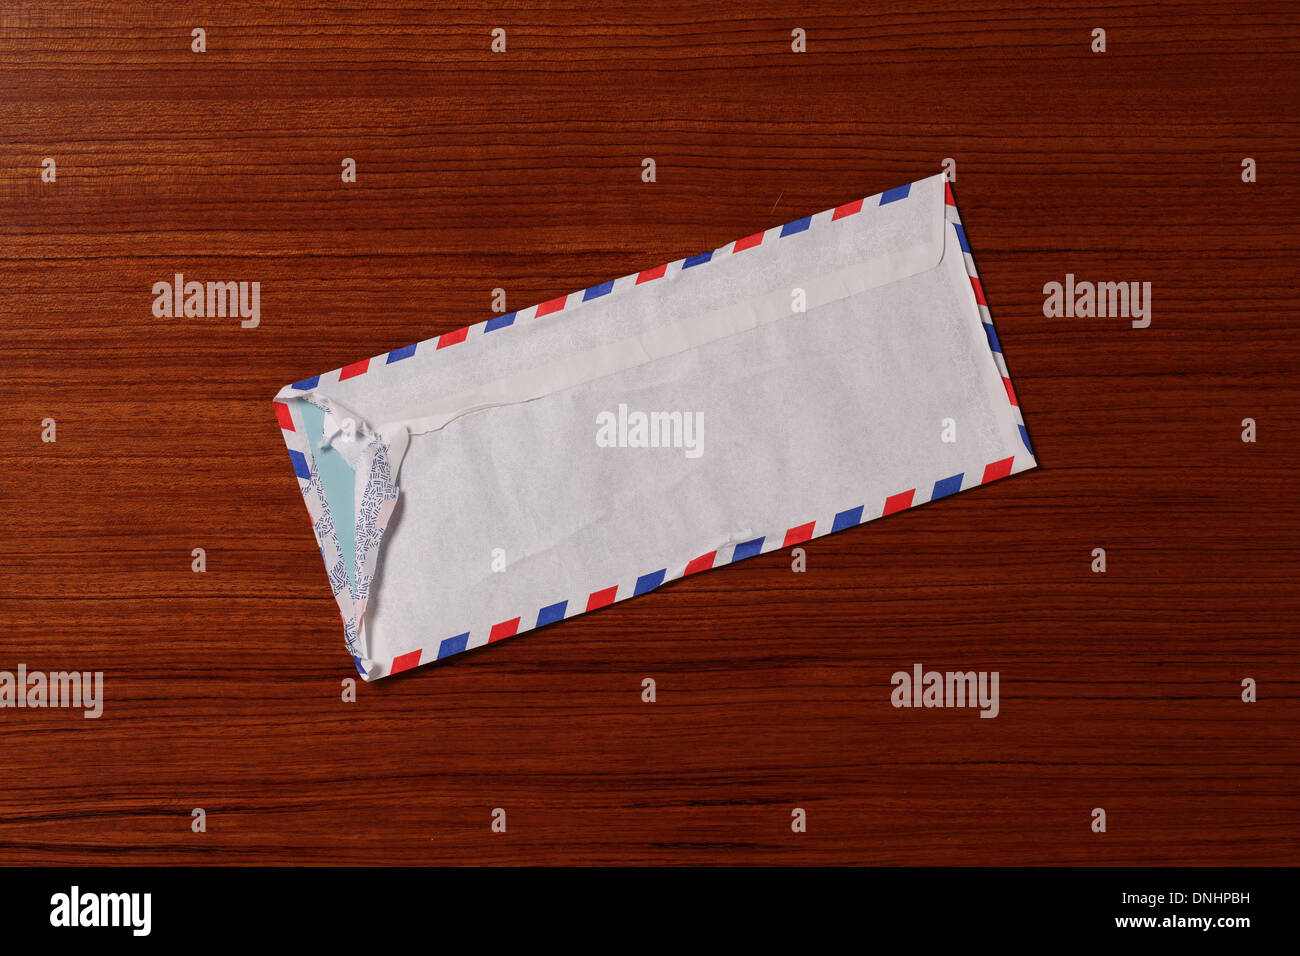 An air mail postage envelope slightly worn and torn on a wood surface. Stock Photo